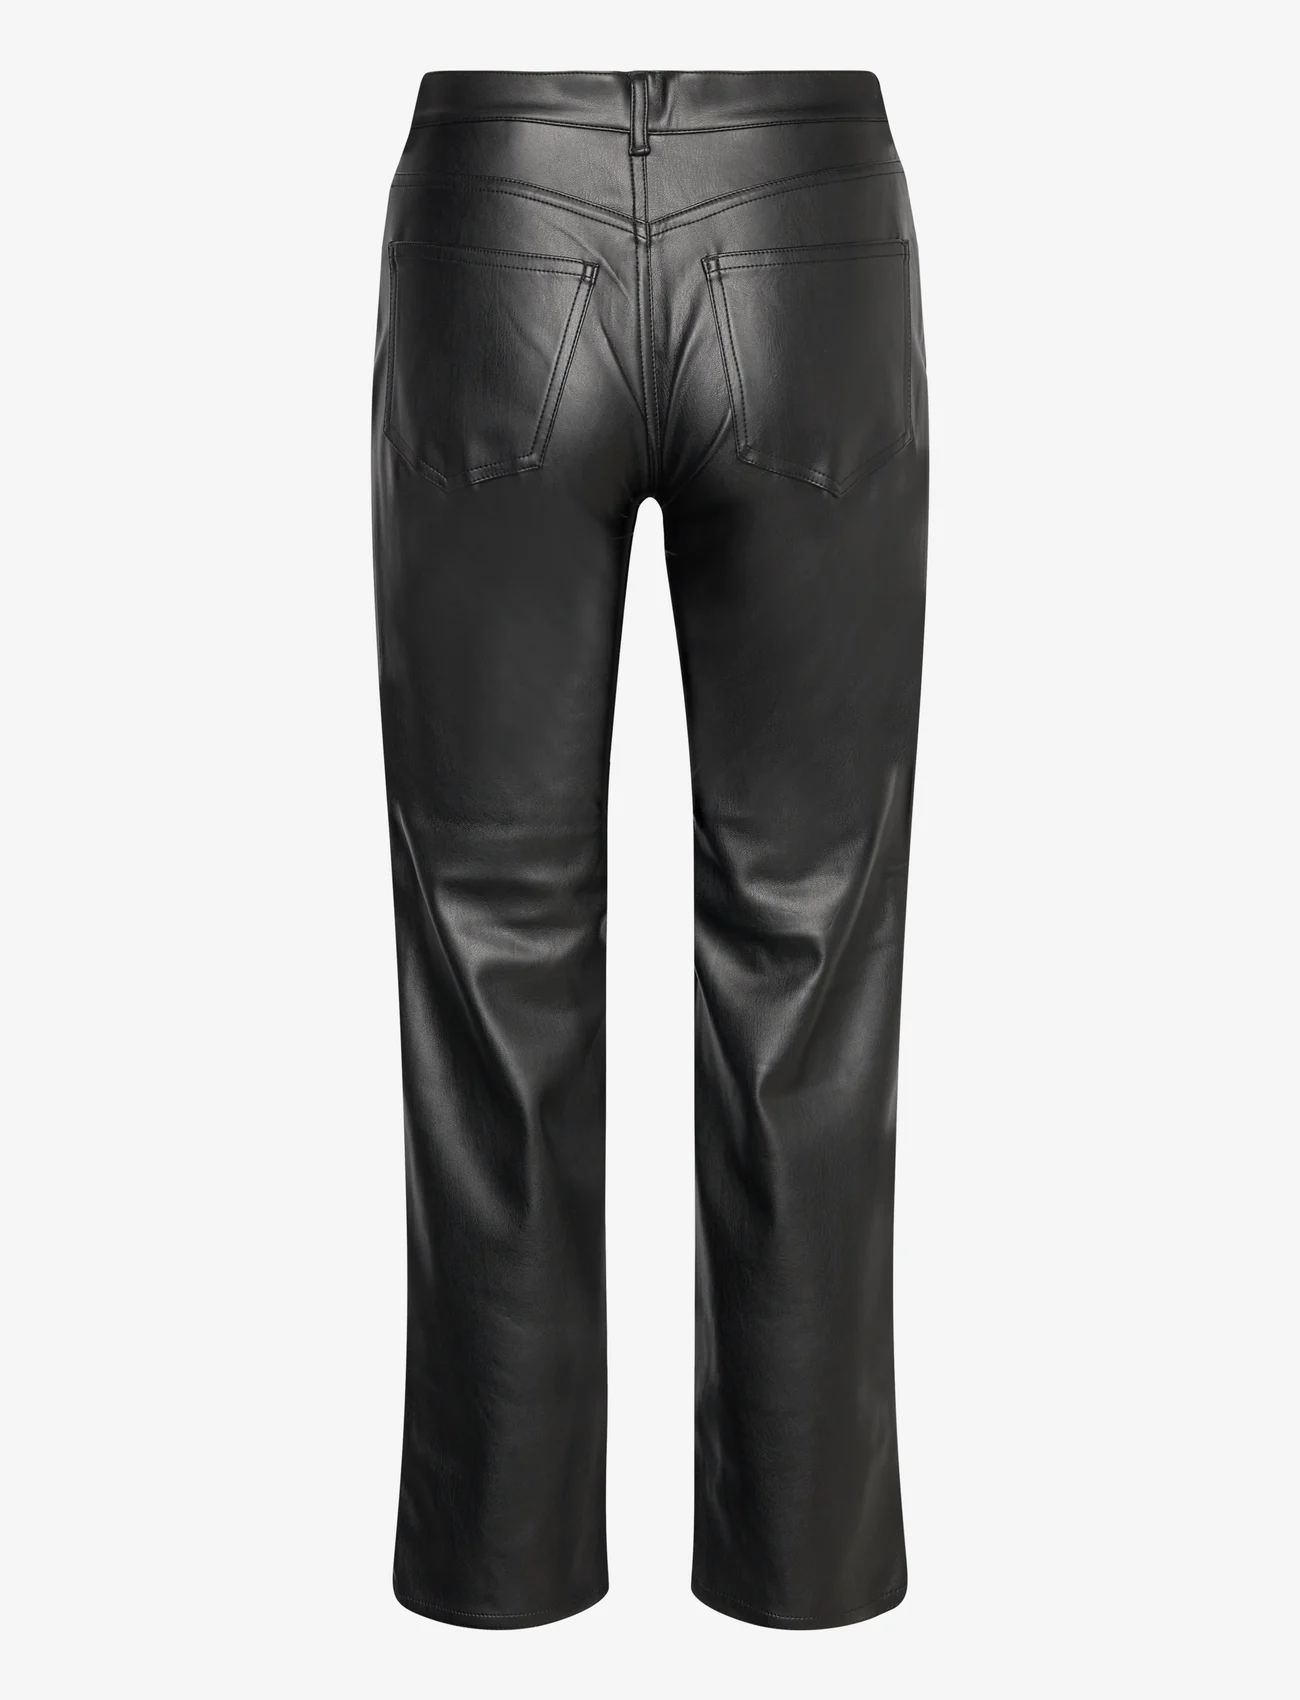 The Kooples - JEAN - party wear at outlet prices - noir - 1